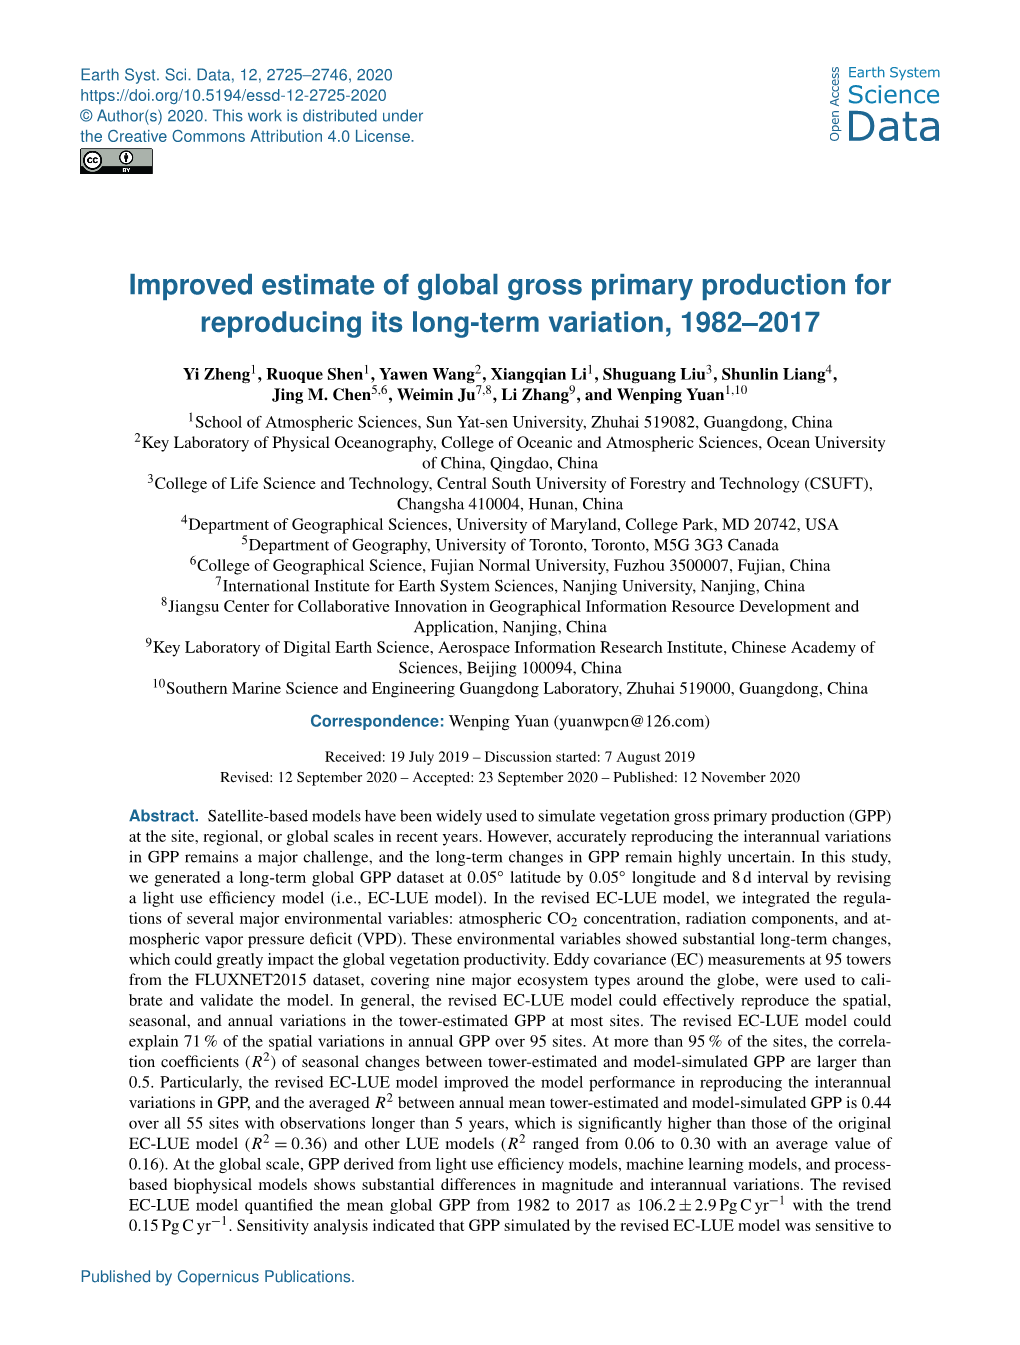 Improved Estimate of Global Gross Primary Production for Reproducing Its Long-Term Variation, 1982–2017